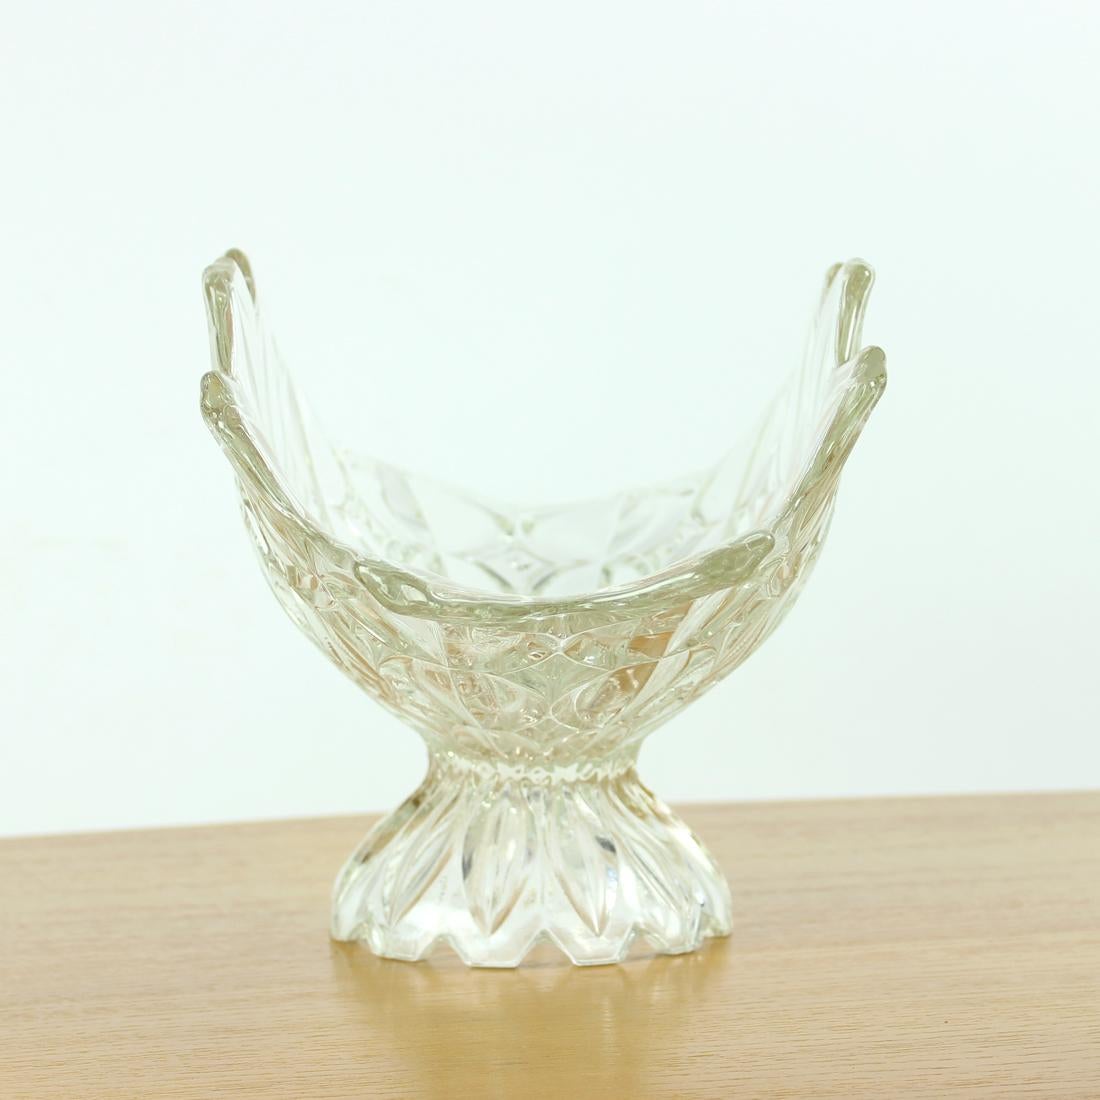 Large Pressed Glass Bowl, Tulip Collection Hermanowa Hut, 1957 For Sale 7